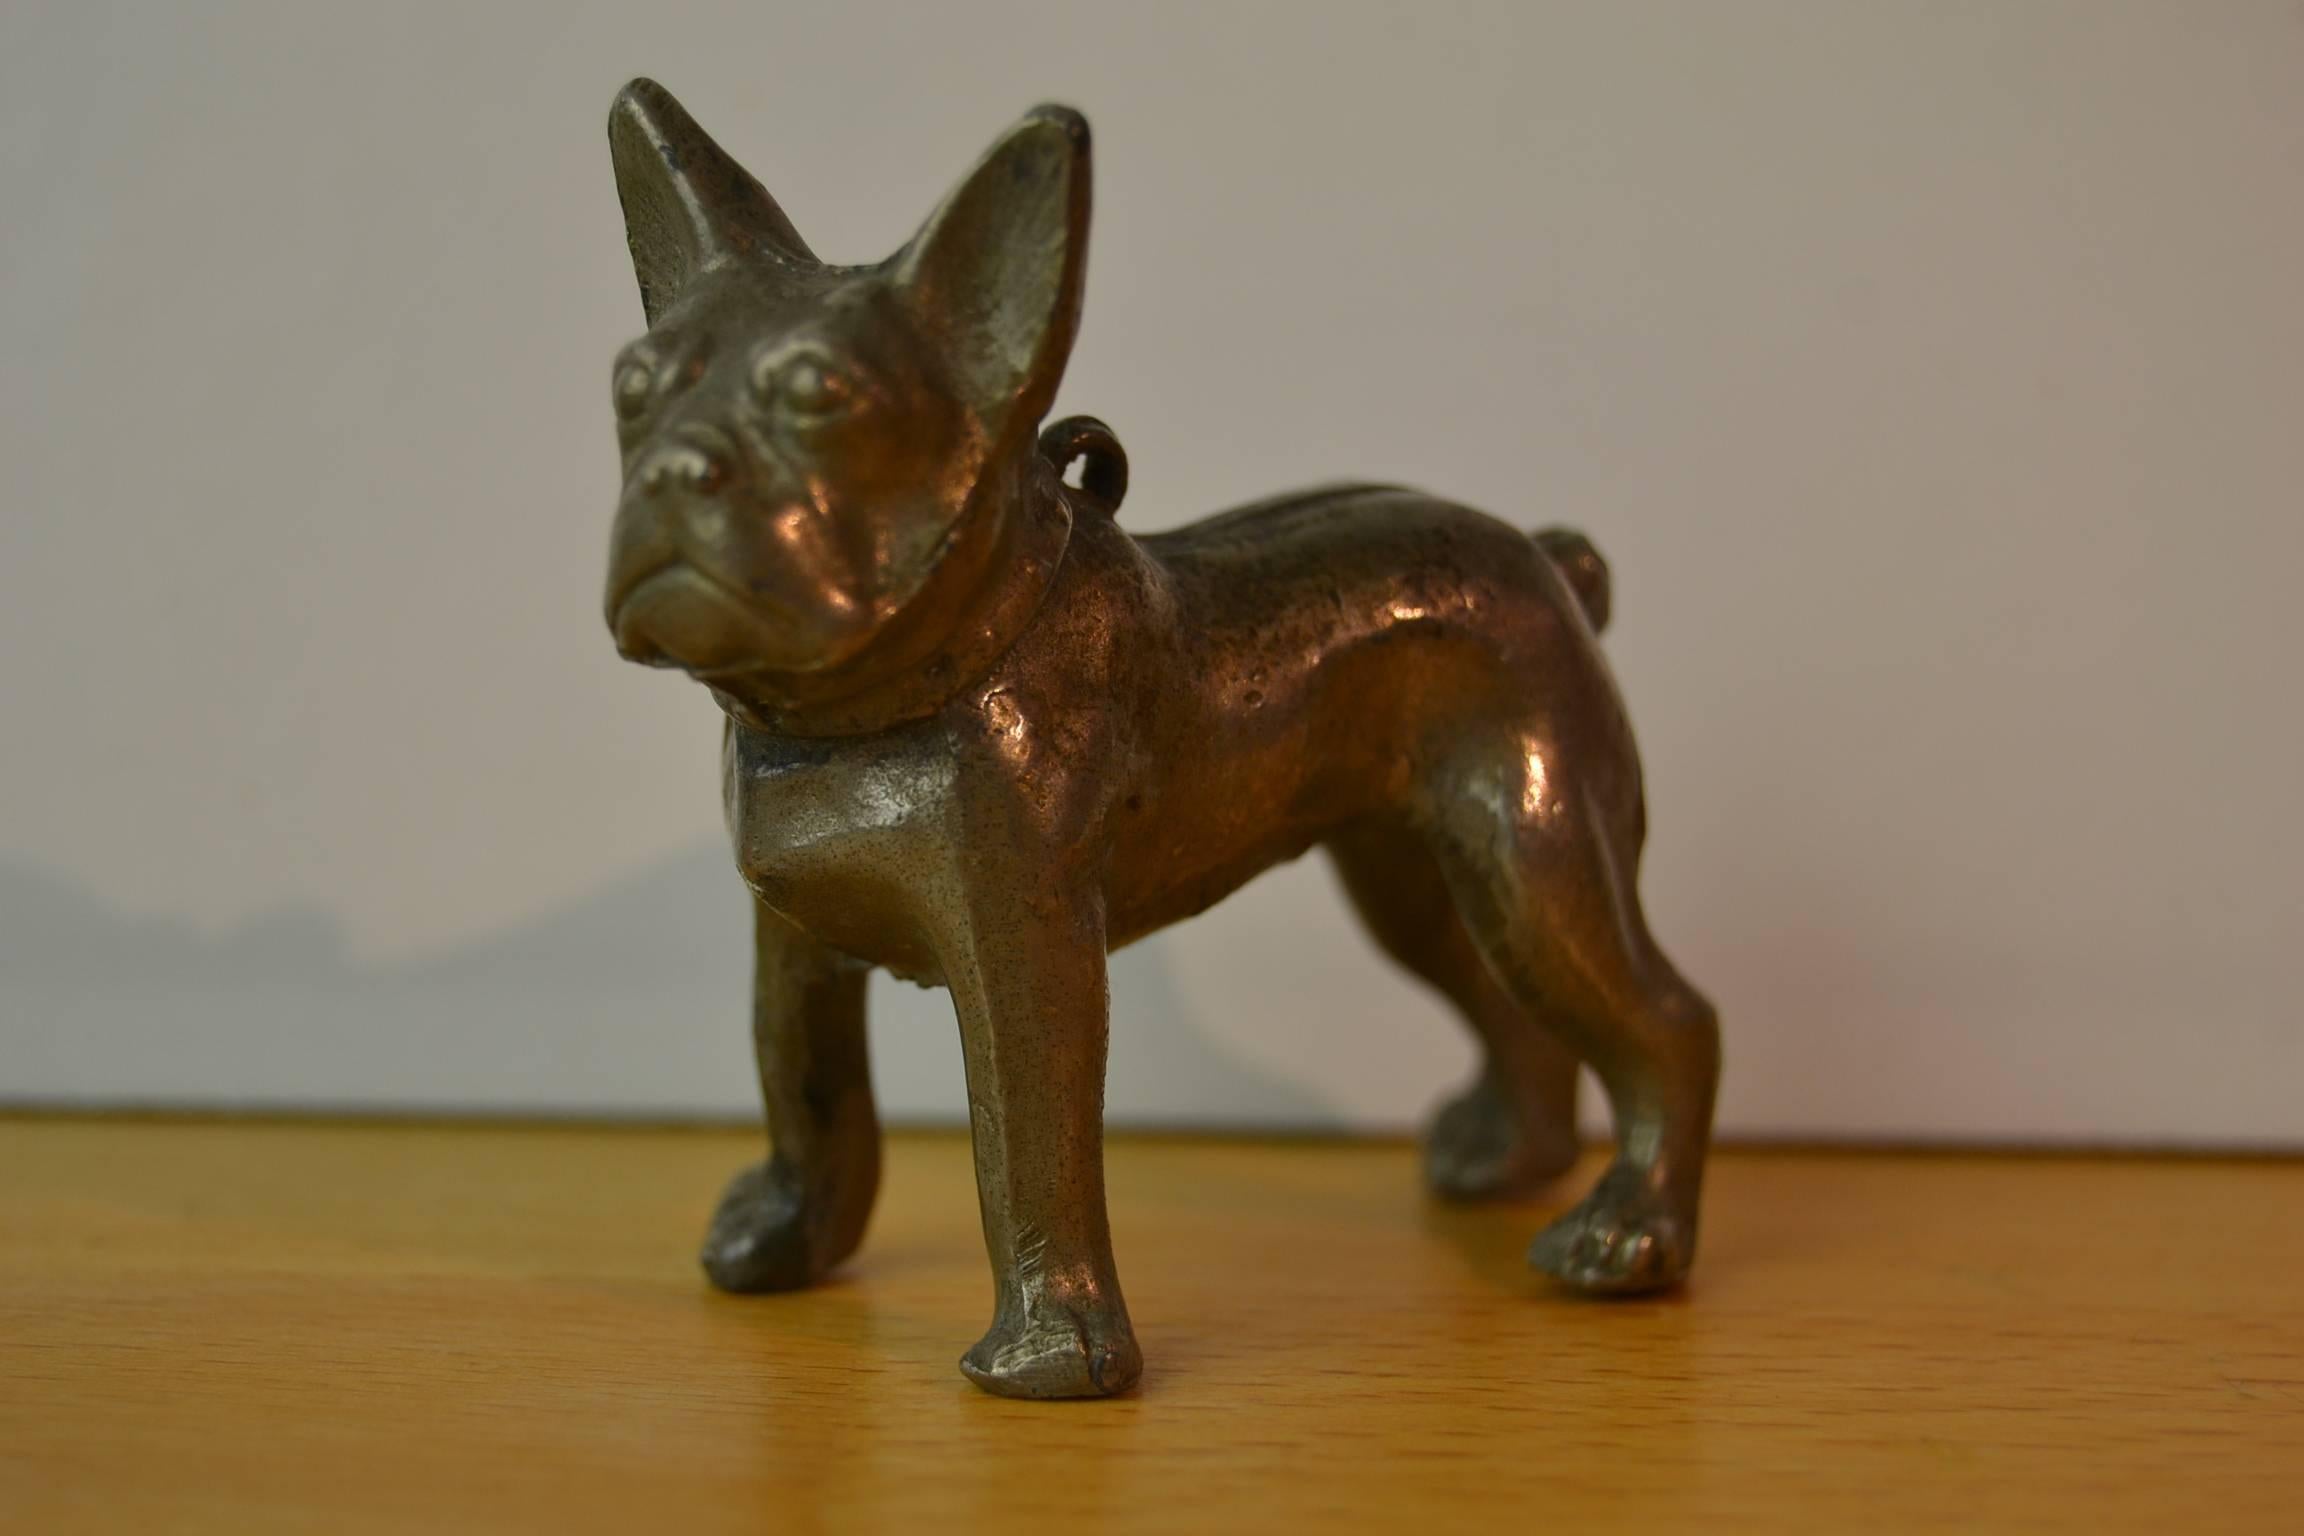 Lovely Old very detailed metal French bulldog - miniature figurine - pendant.
Marked: Made in Japan, stamped on the bottom side.
Little statue made from heavy pewter metal.